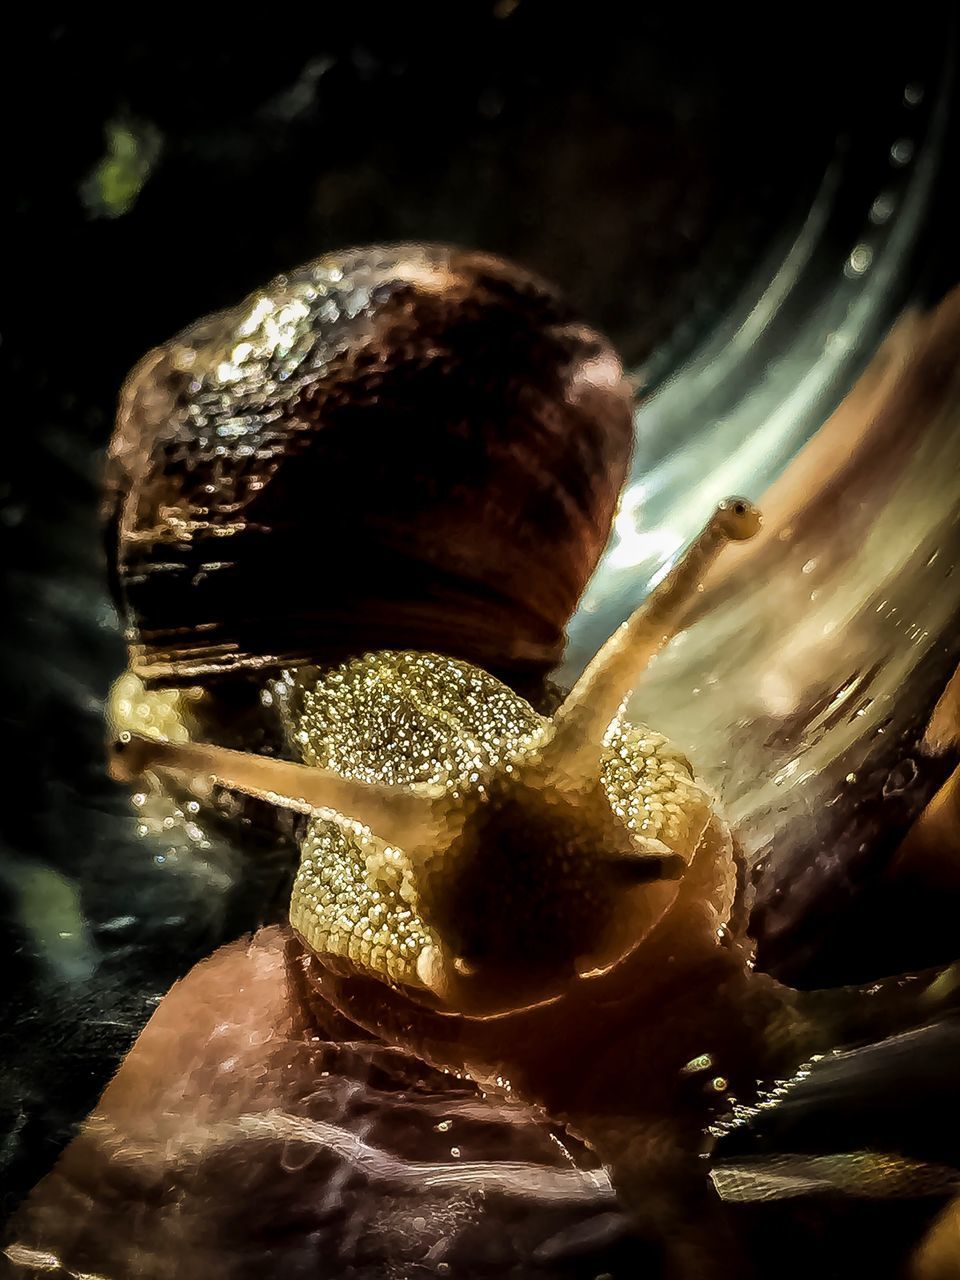 CLOSE-UP OF SNAIL ON WATER IN CONTAINER